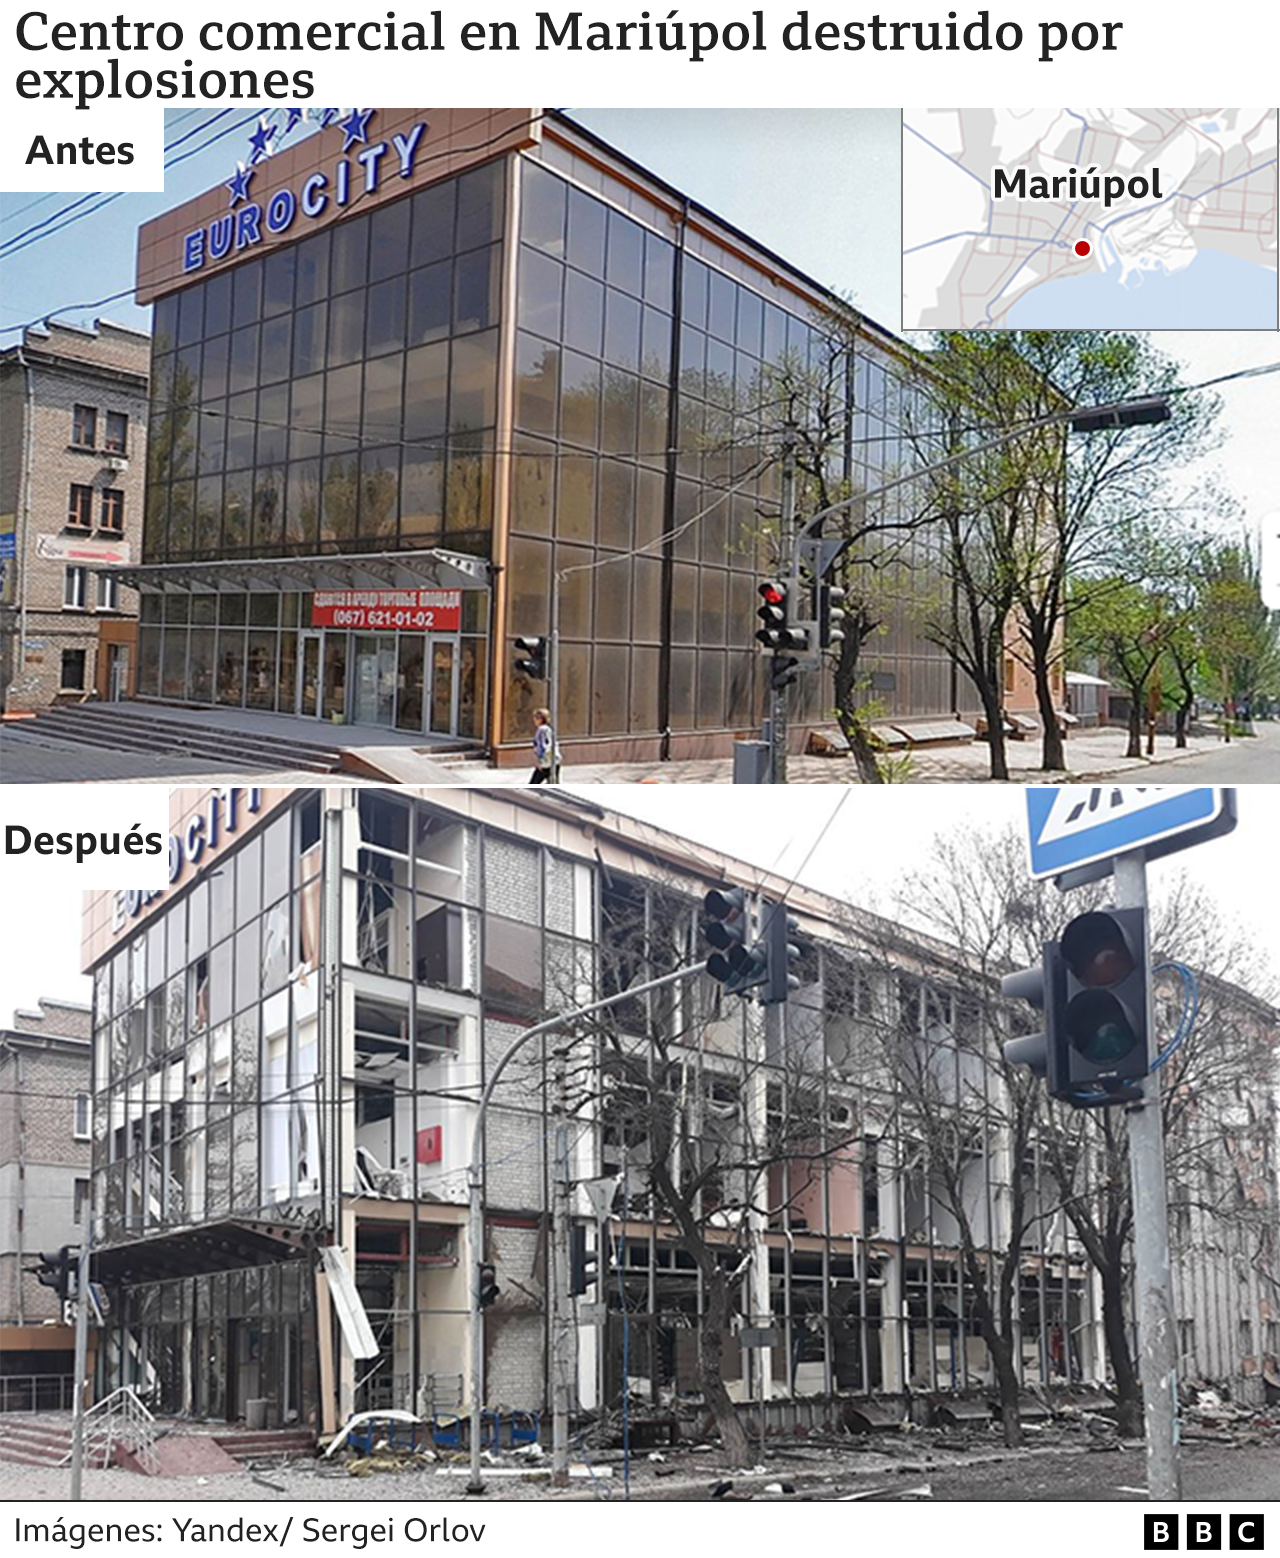 Shopping center in Mariupol before and after the Russian attacks